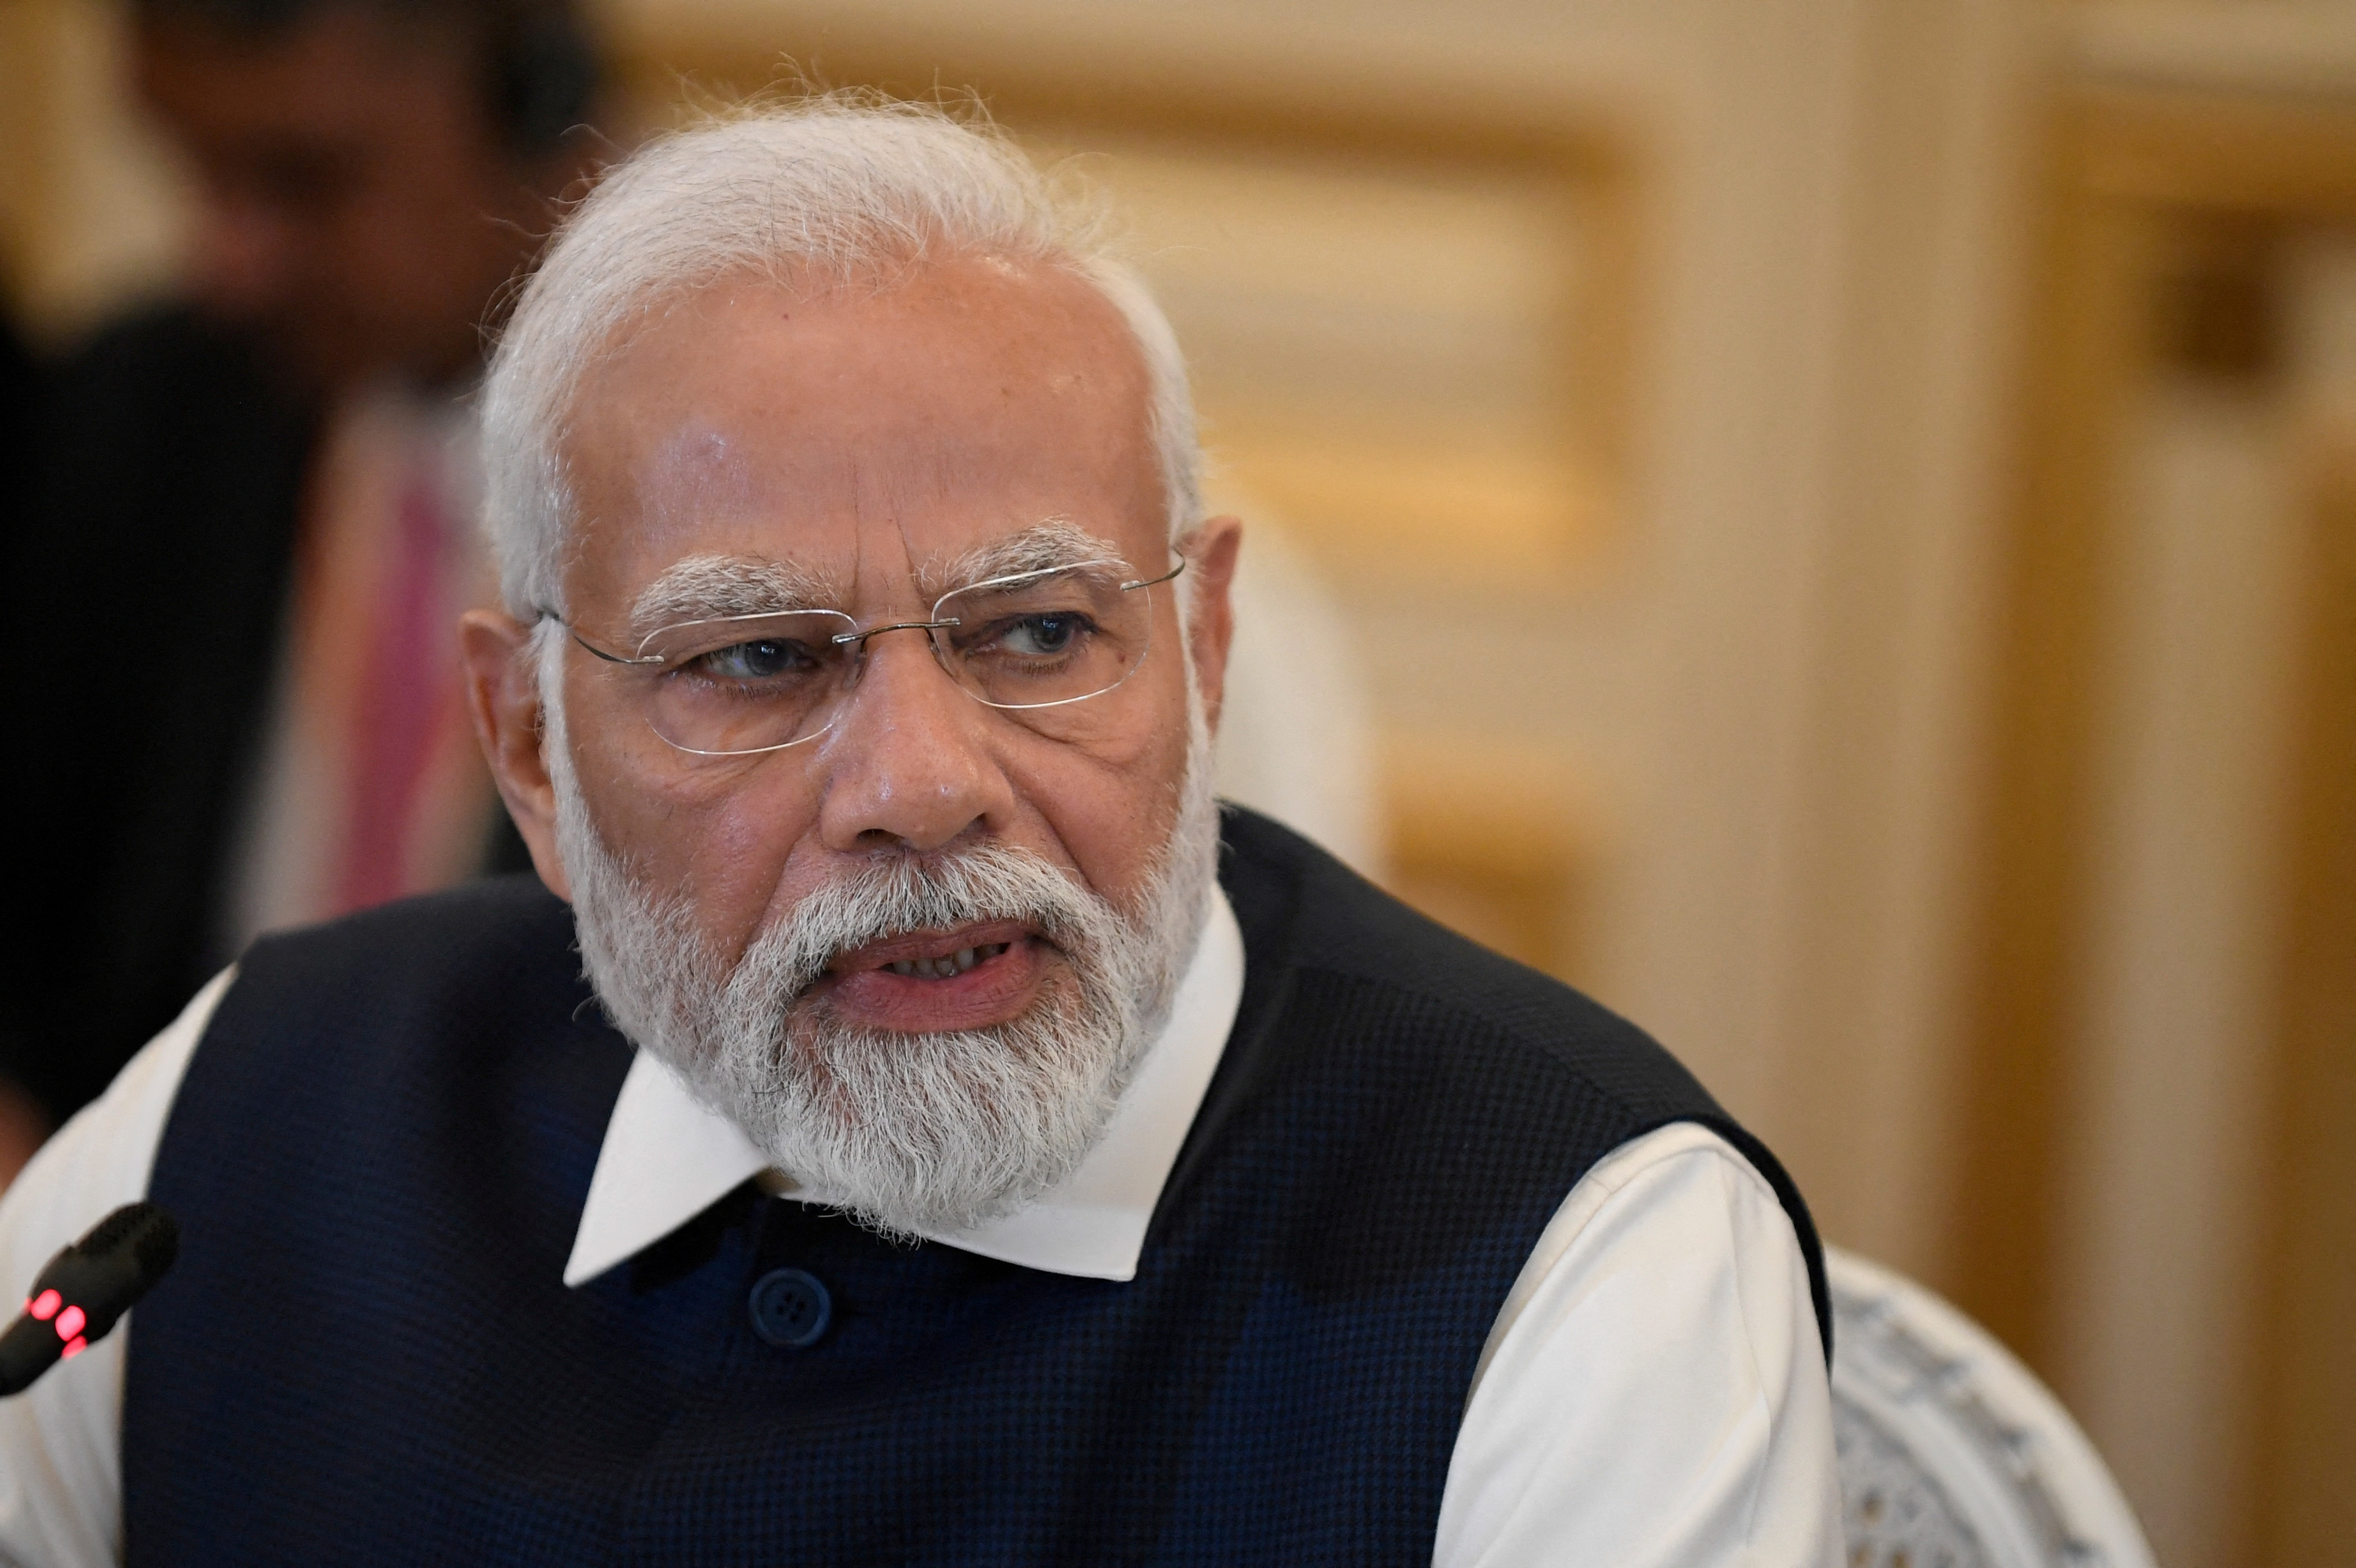 India's Modi survives no-confidence vote over his handling of ethnic  violence